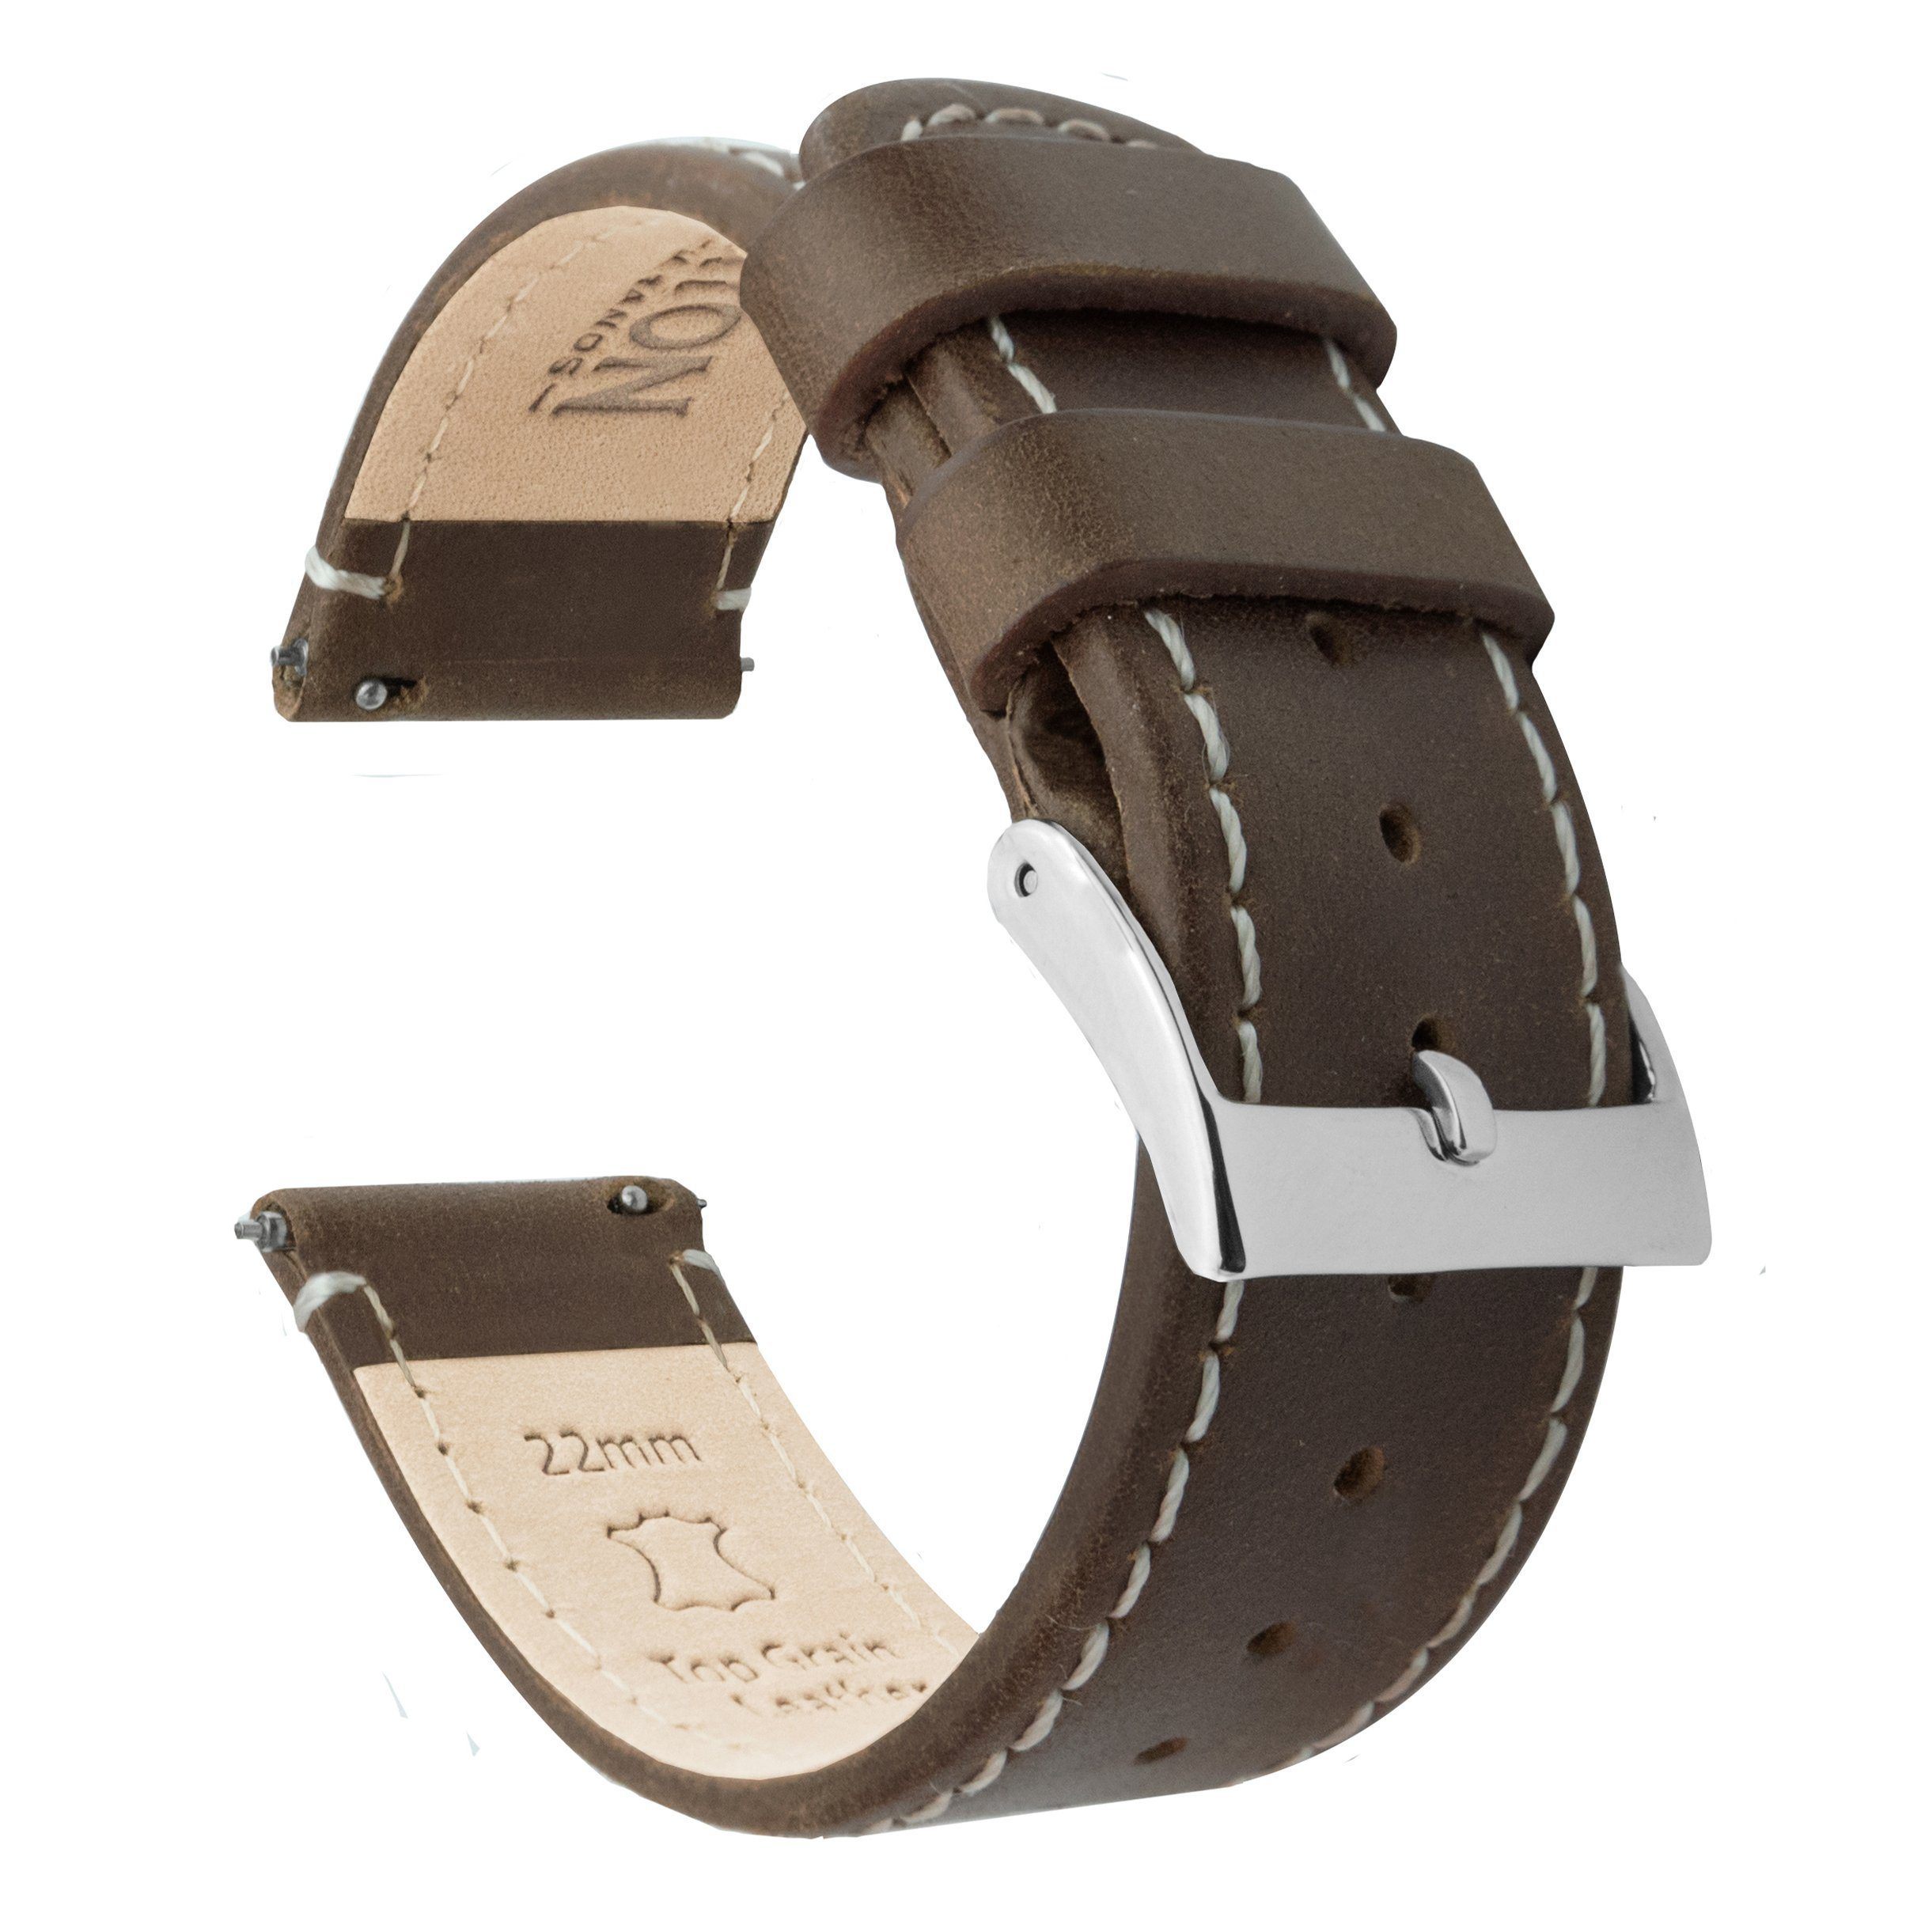 18mm Brown Genuine Leather Watchband | Center Padded Replacement Wrist  Strap with Creamy White Colored Stitching that brings New Life to Any Watch